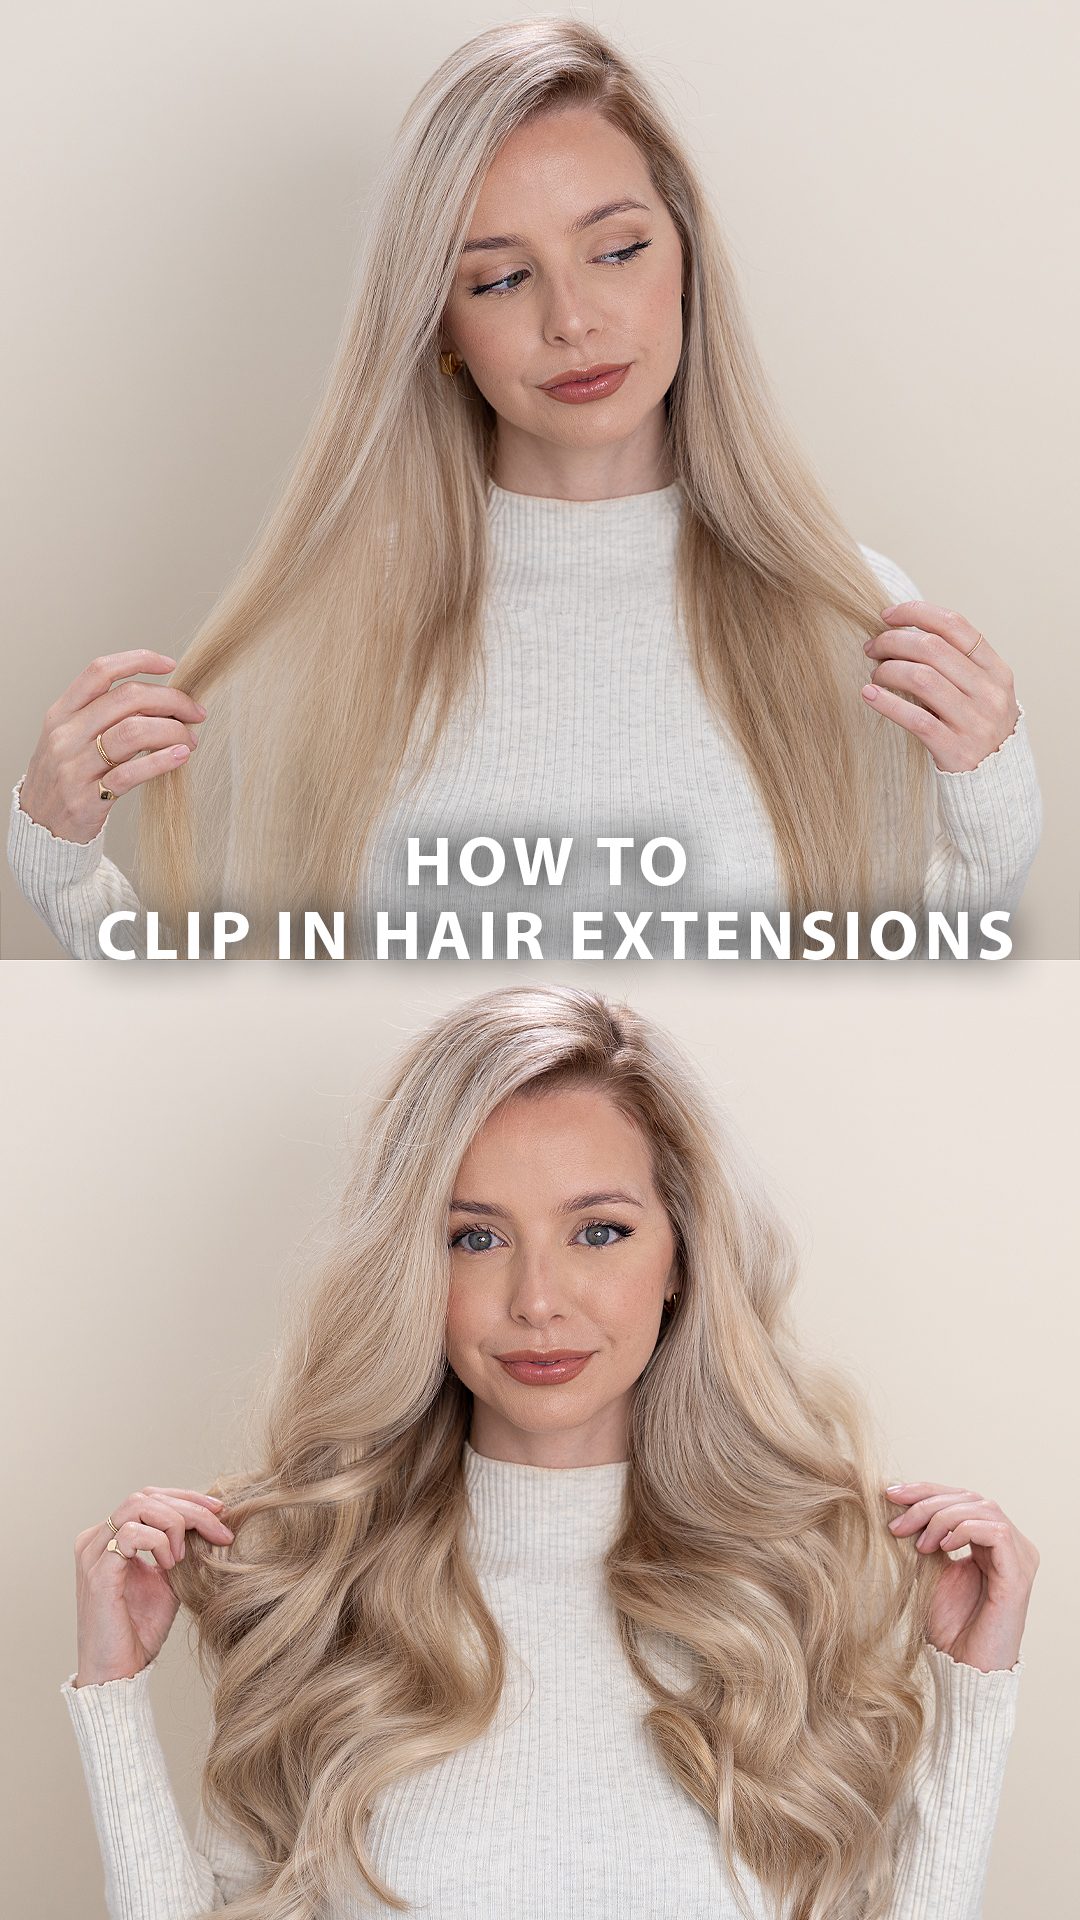 HOW TO CLIP IN HAIR EXTENSIONS + HALO - Alex Gaboury